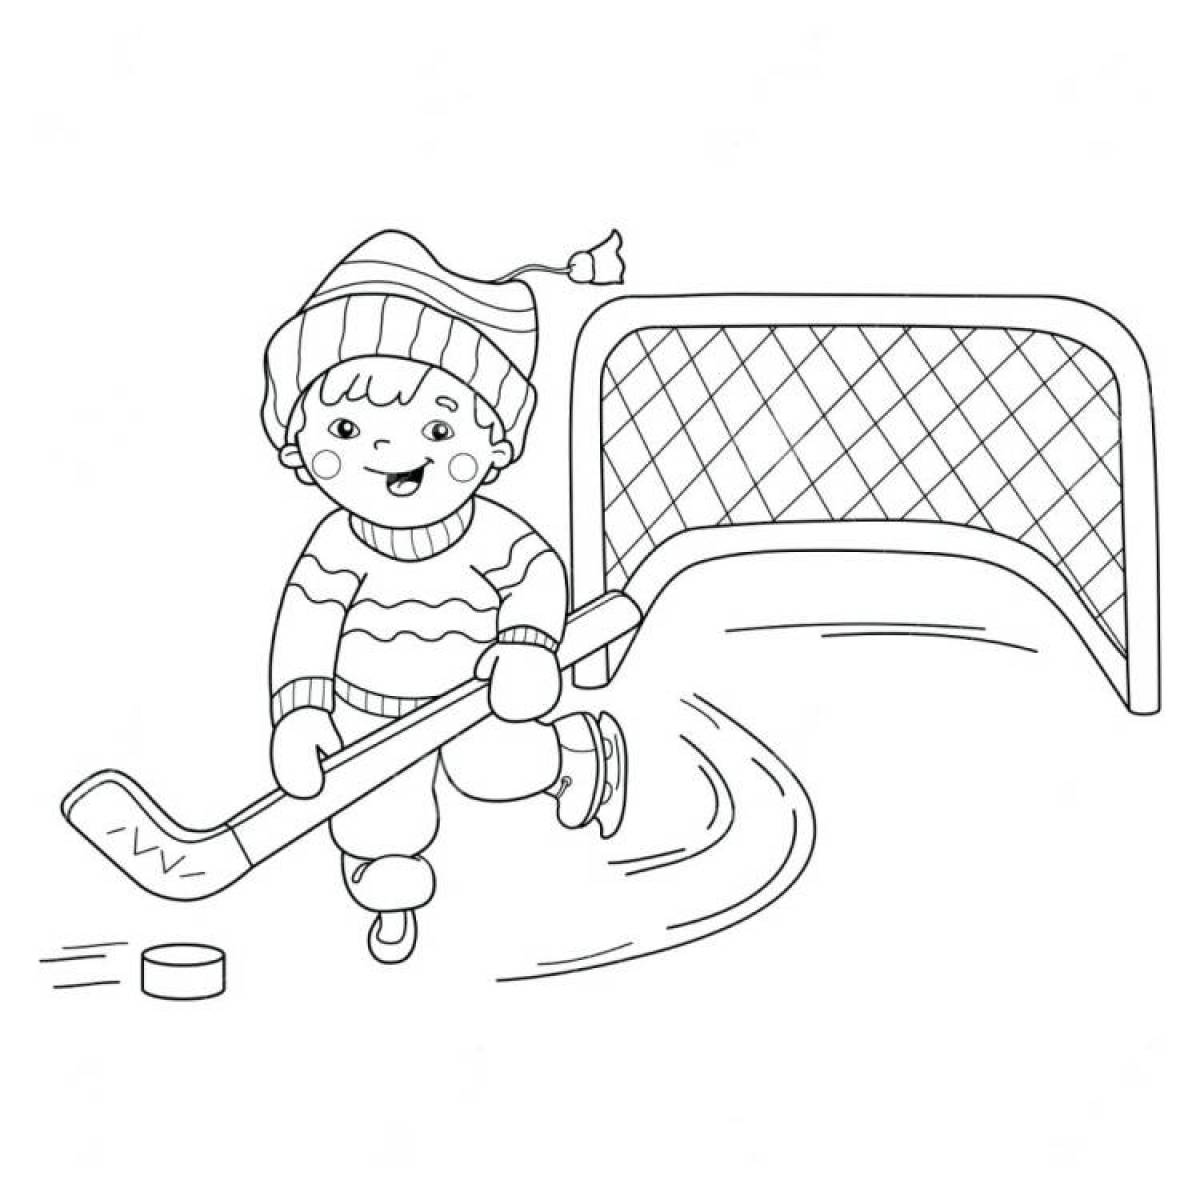 Colourful coloring for children 3-4 years old winter sports